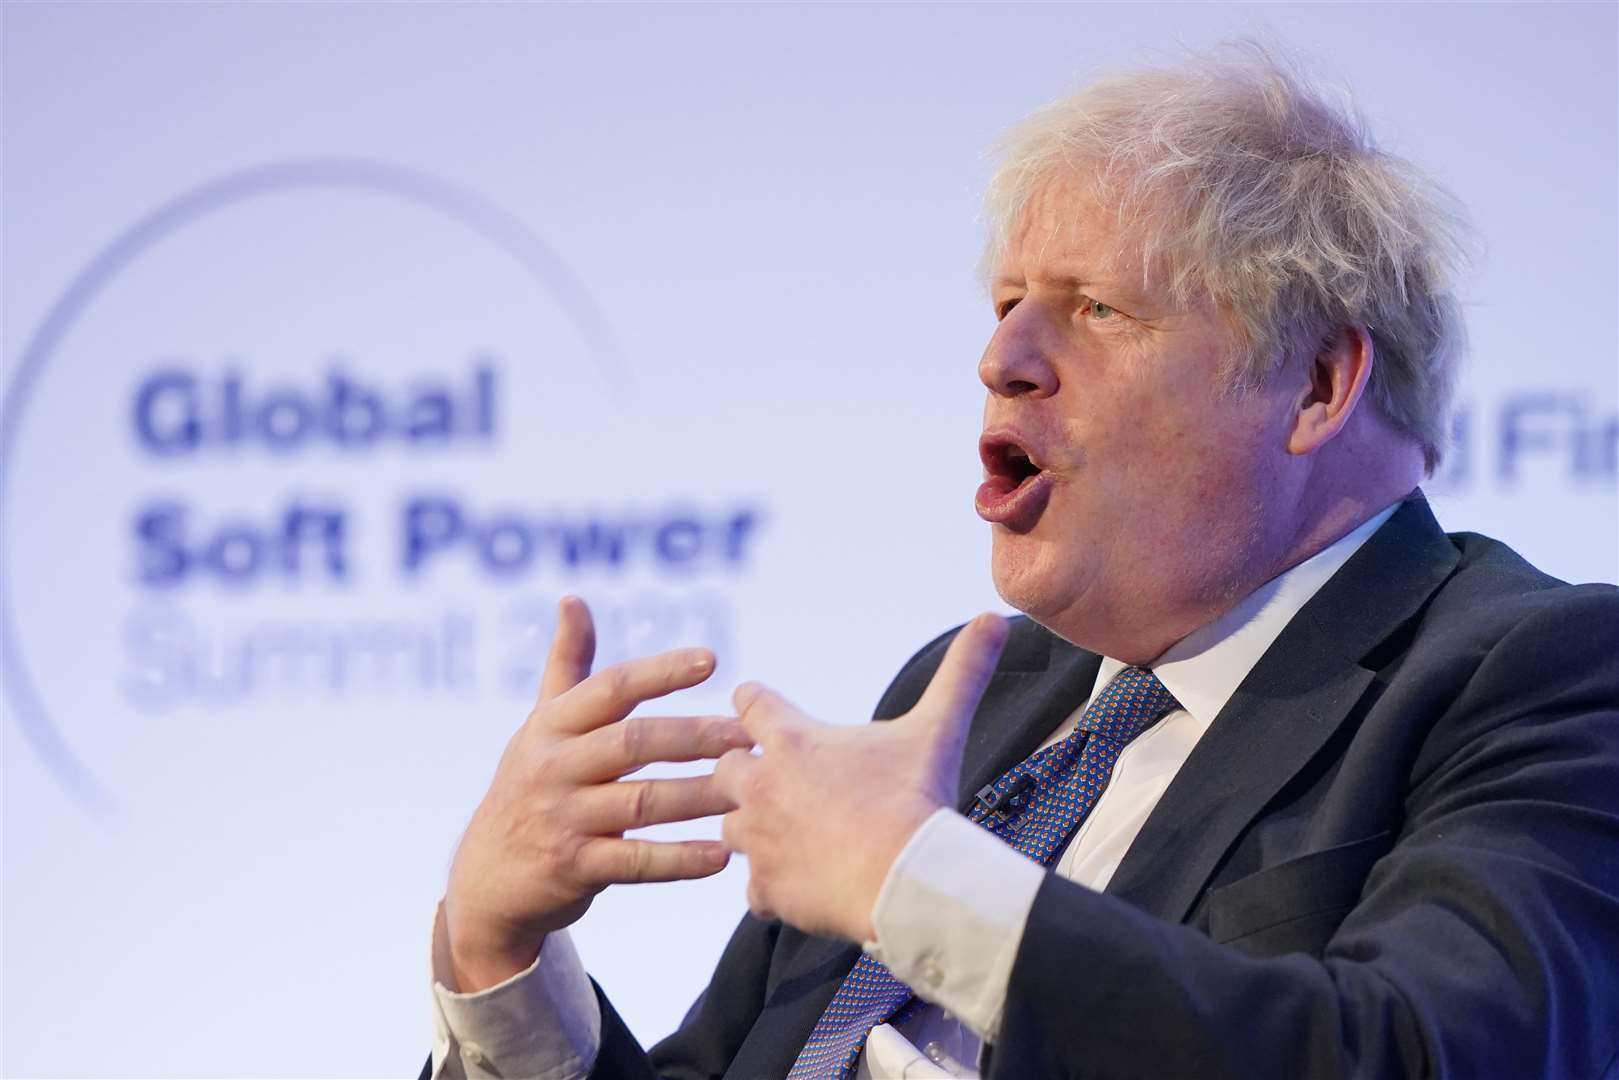 Former prime minister Boris Johnson speaking at a conference earlier this month (Jonathan Brady/PA)